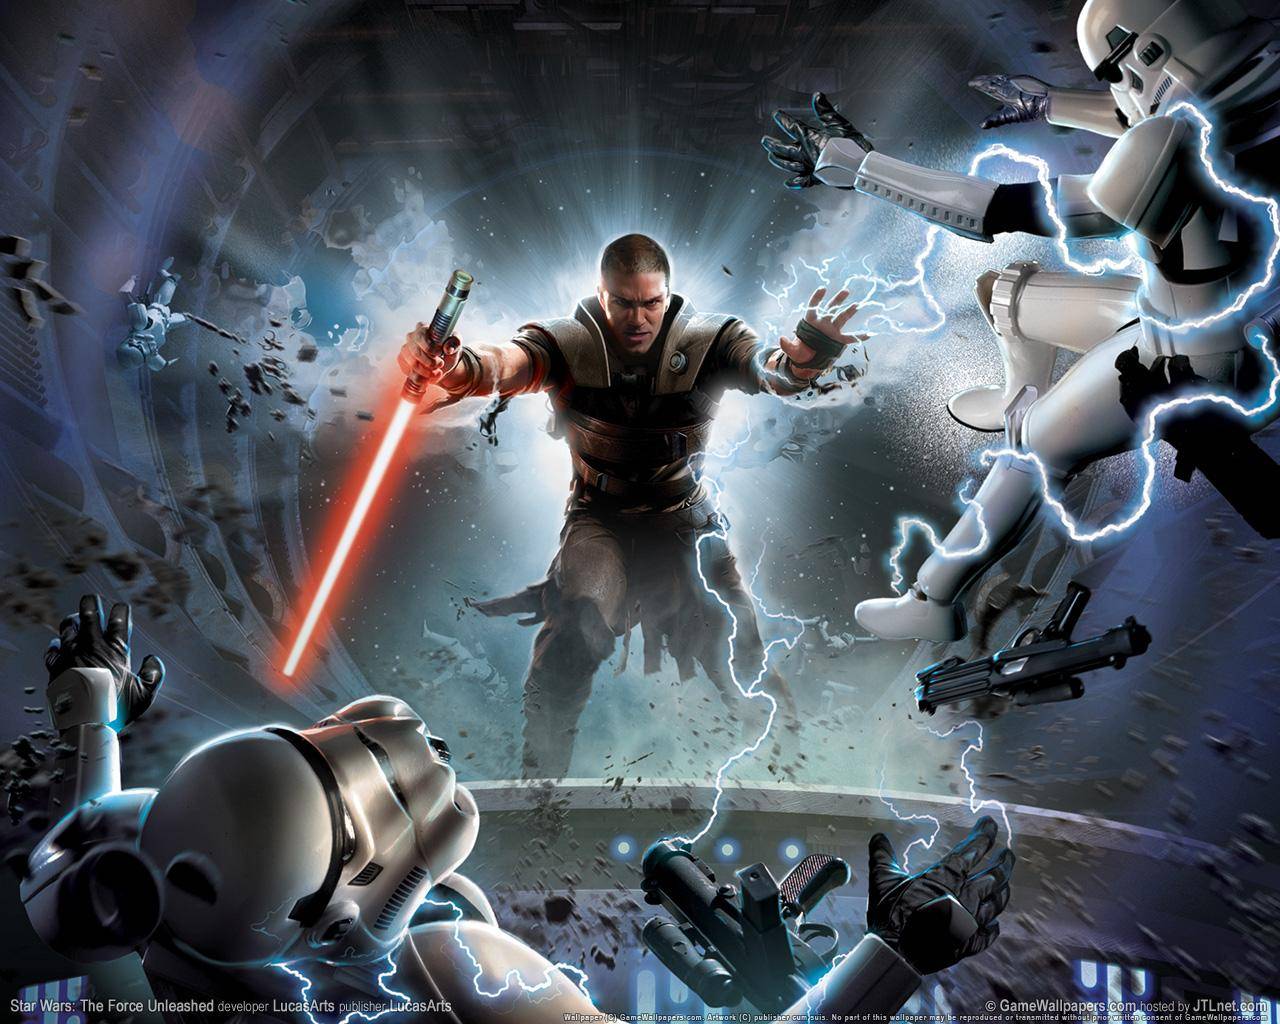 Save Games Star Wars The Force Unleashed USE file - Empire at War - Mod DB